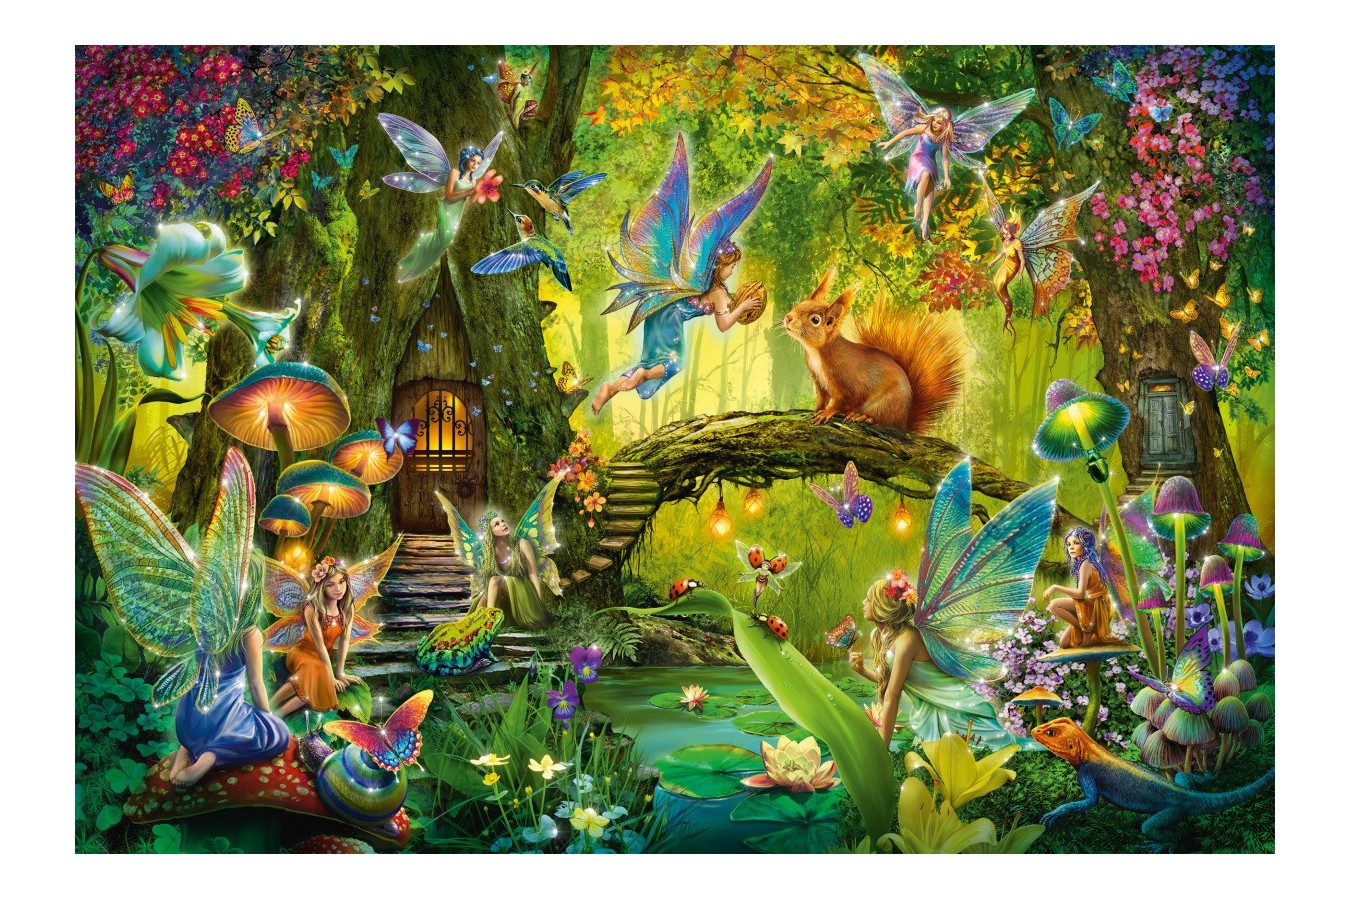 Puzzle Schmidt - Fairies In The Forest, 200 piese, contine bacheta magica (56333)